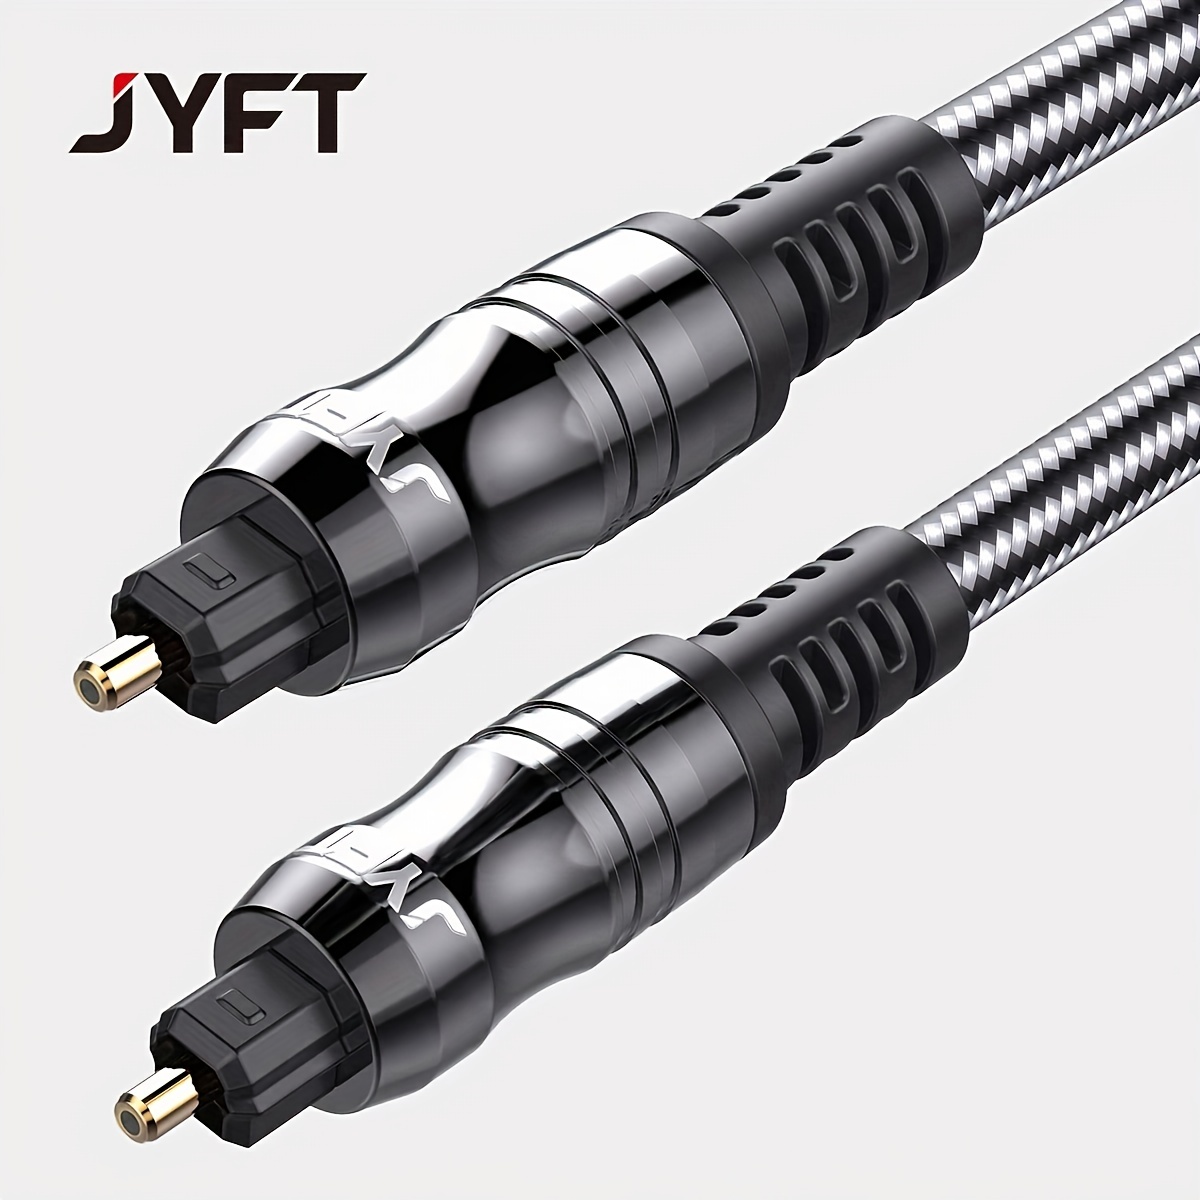 Subwoofer S/PDIF Audio Digital Coaxial RCA Composite Video Cable (10 Feet)  - Gold Plated Dual Shielded RCA to RCA Male Connectors Black for Home  Theater, HDTV, Digital Video Recorder 